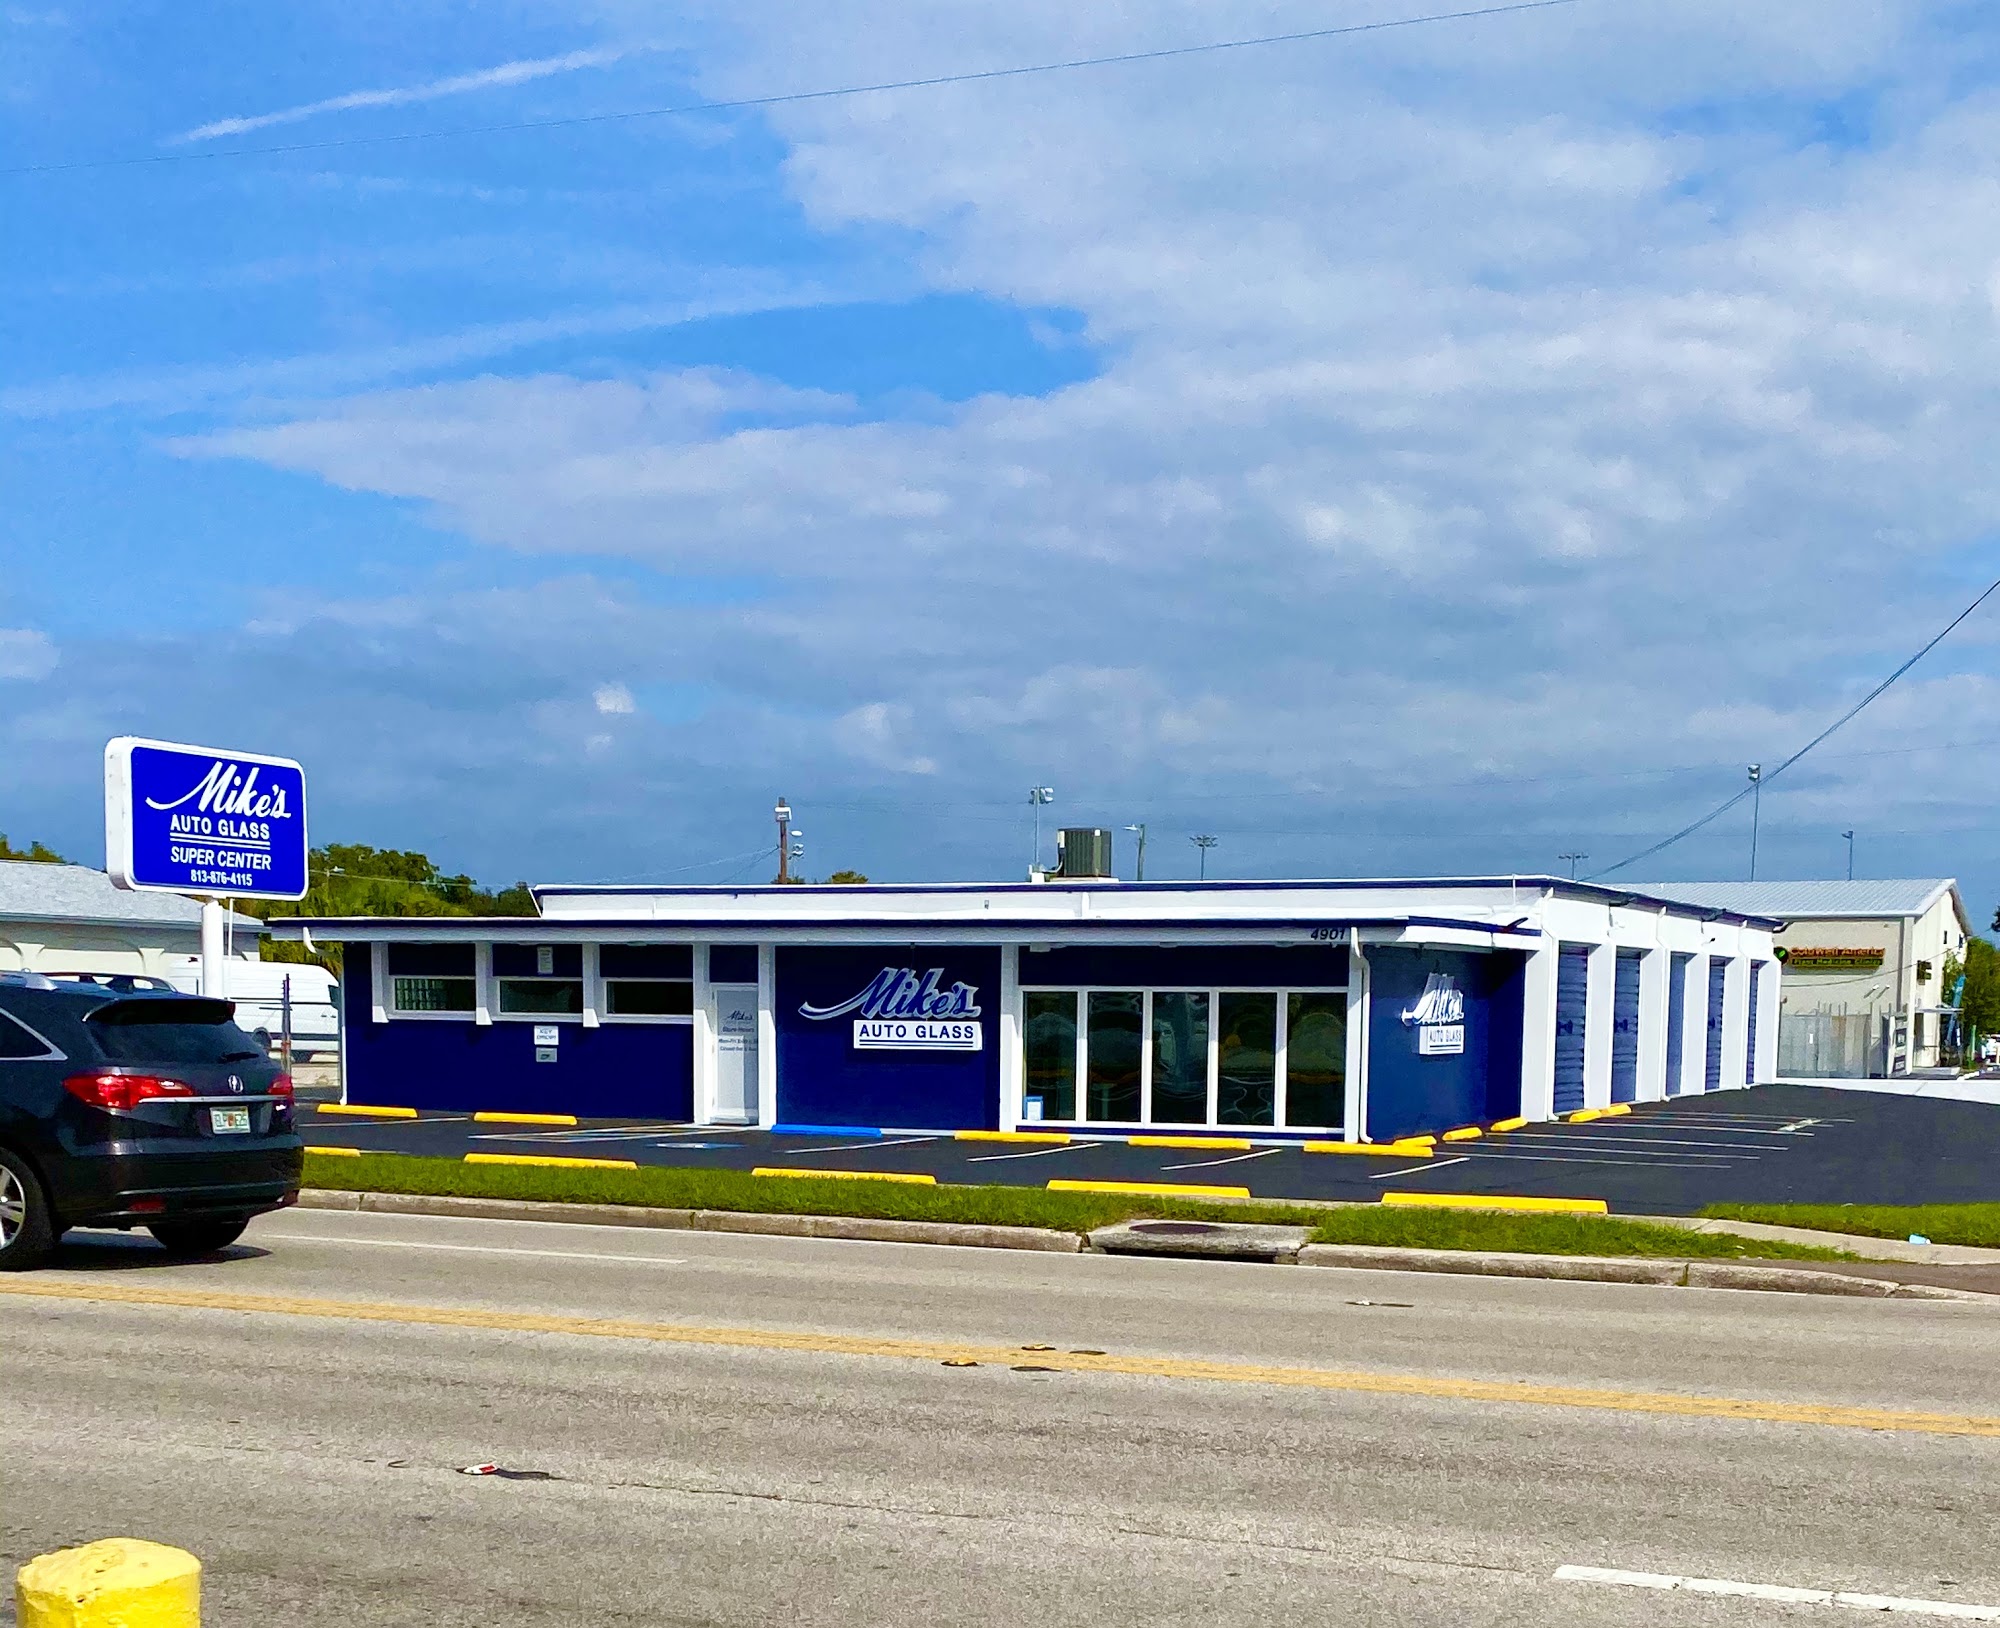 Mike's Auto Glass Tampa